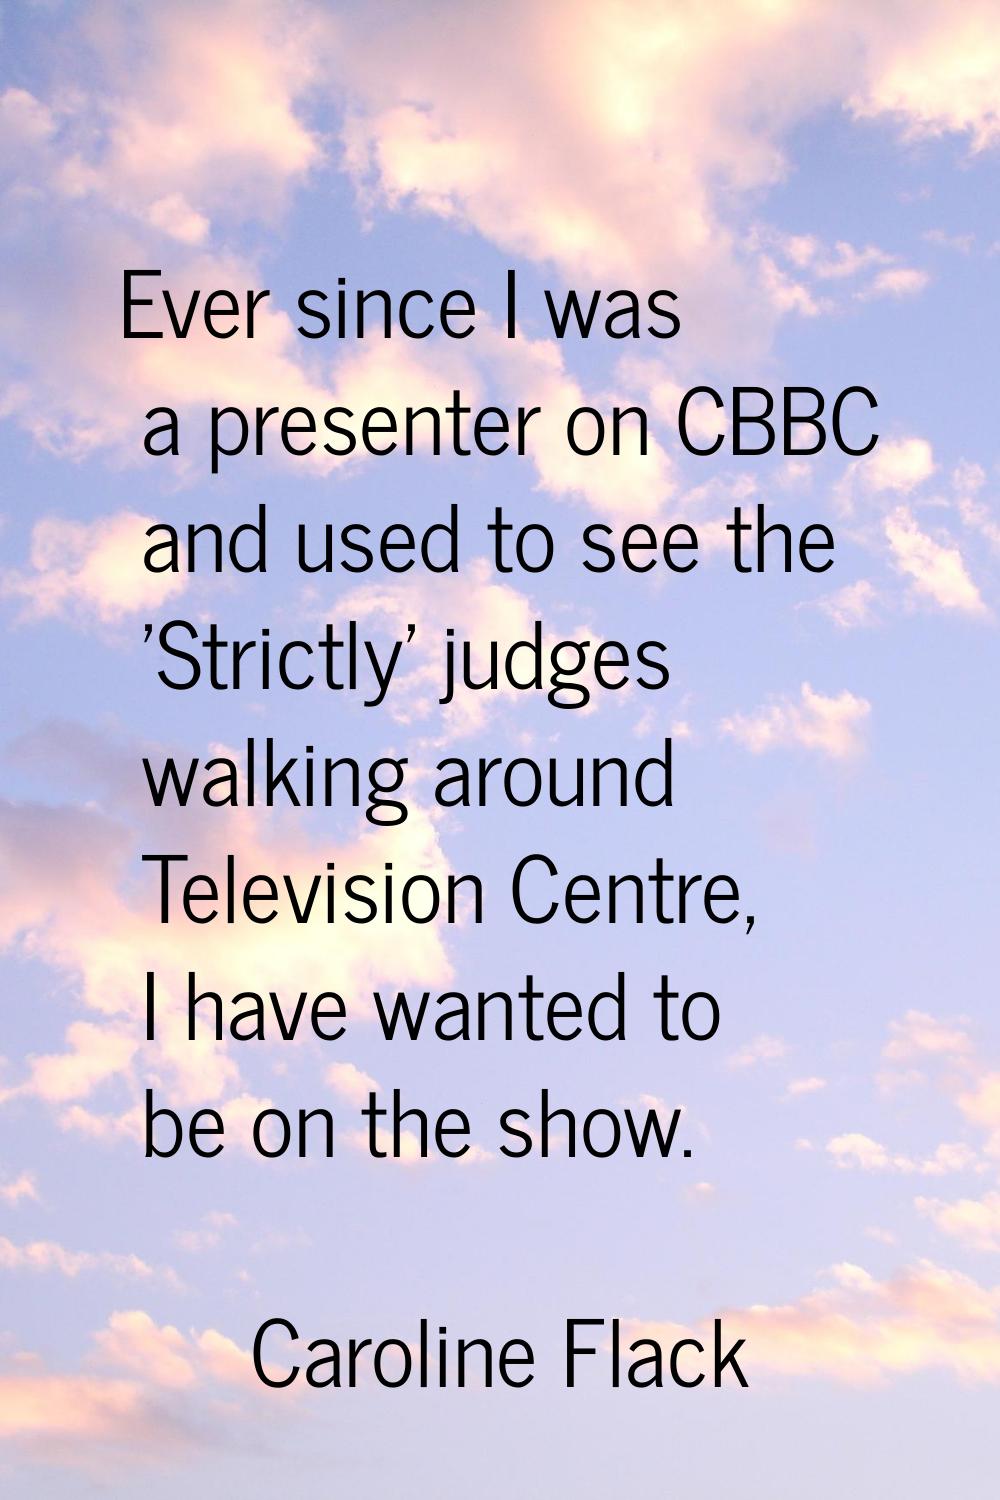 Ever since I was a presenter on CBBC and used to see the 'Strictly' judges walking around Televisio